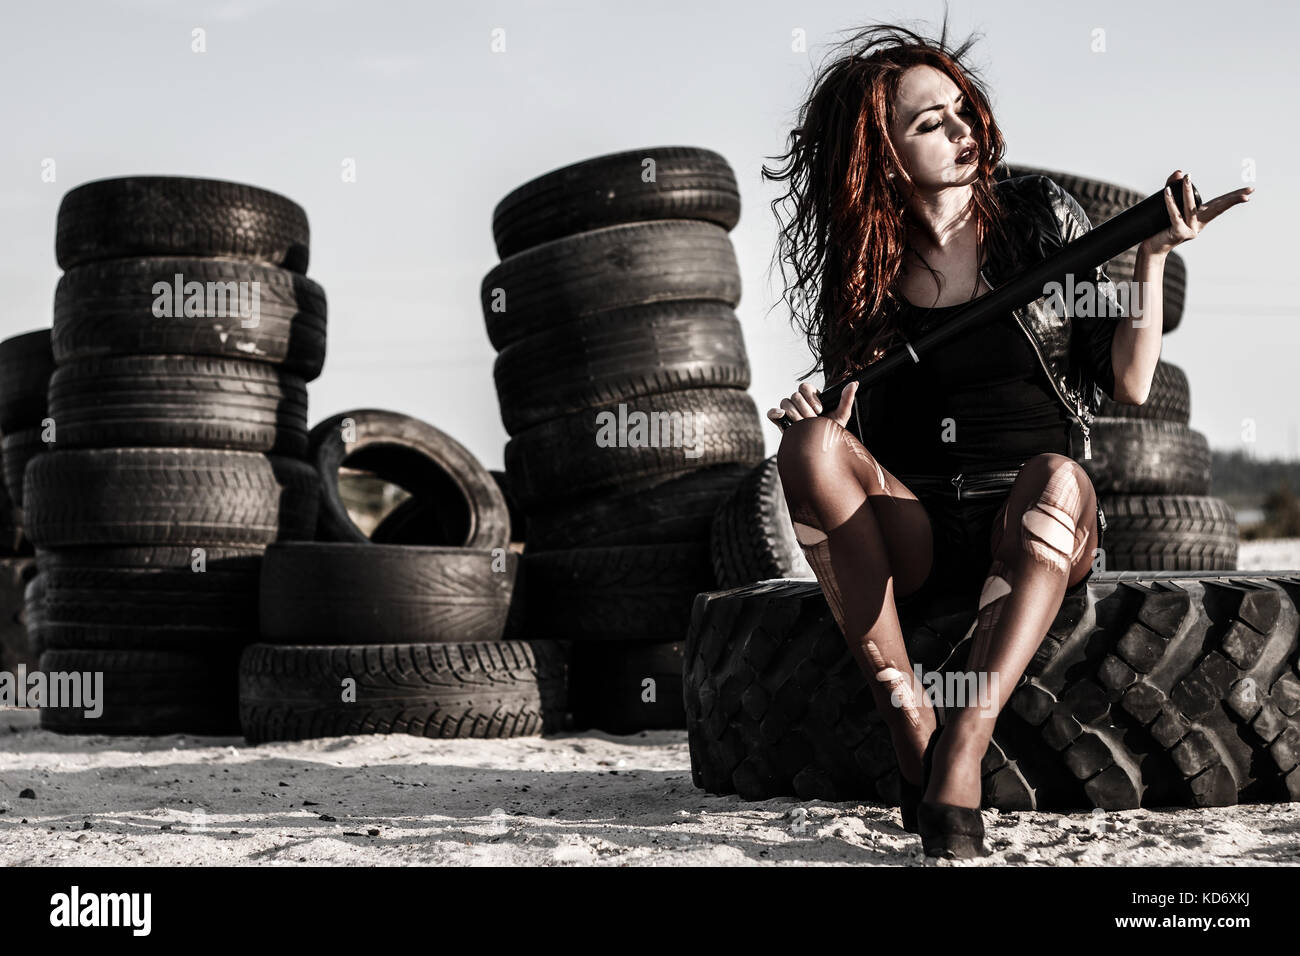 Disheveled redhead woman sitting with a baseball bat at the background of an old tires Stock Photo